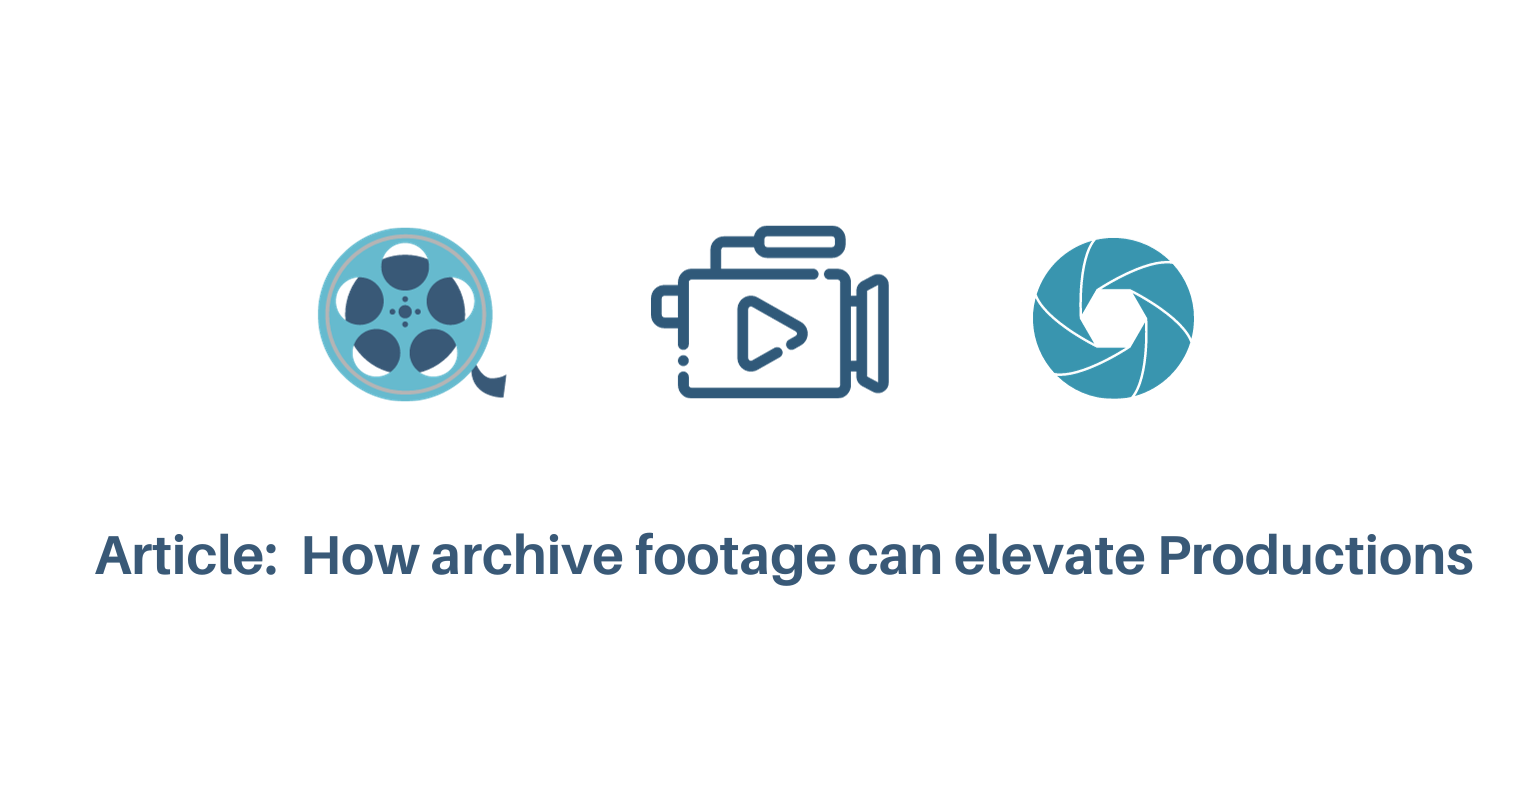 ARTICLE: HOW ARCHIVE FOOTAGE CAN ELEVATE PRODUCTIONS